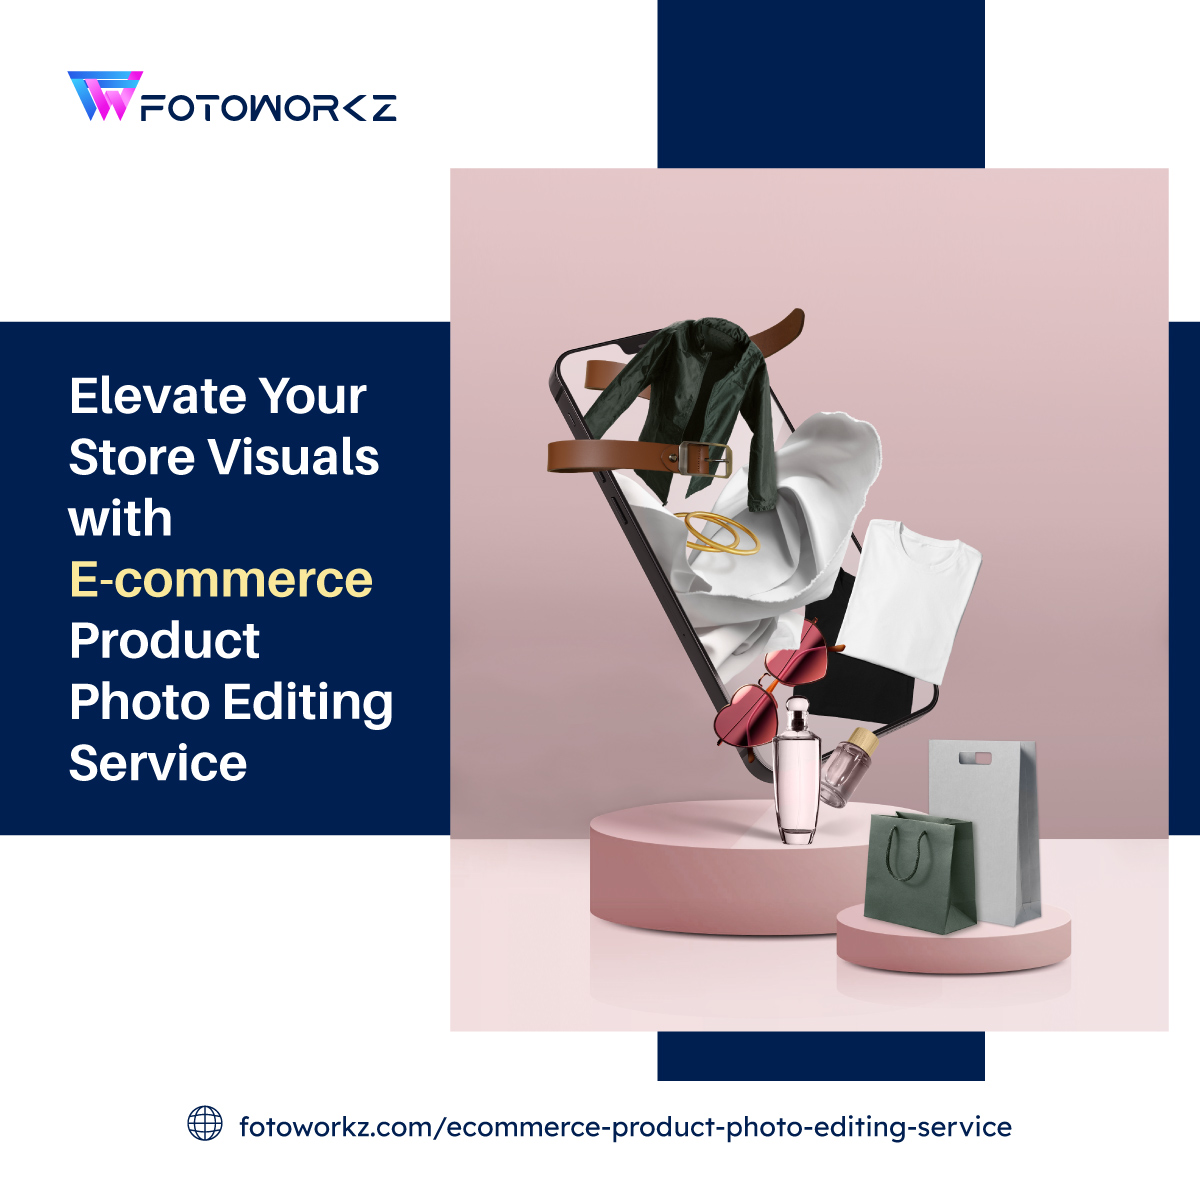 📸 Elevate your e-commerce game with our flawless Product Photo Editing Service! #EcommerceSuccess #socialmediamarketing #photoeditingmagic #photography #photoeditingservice #photoeditingservice #kesis fotoworkz.com/ecommerce-prod…